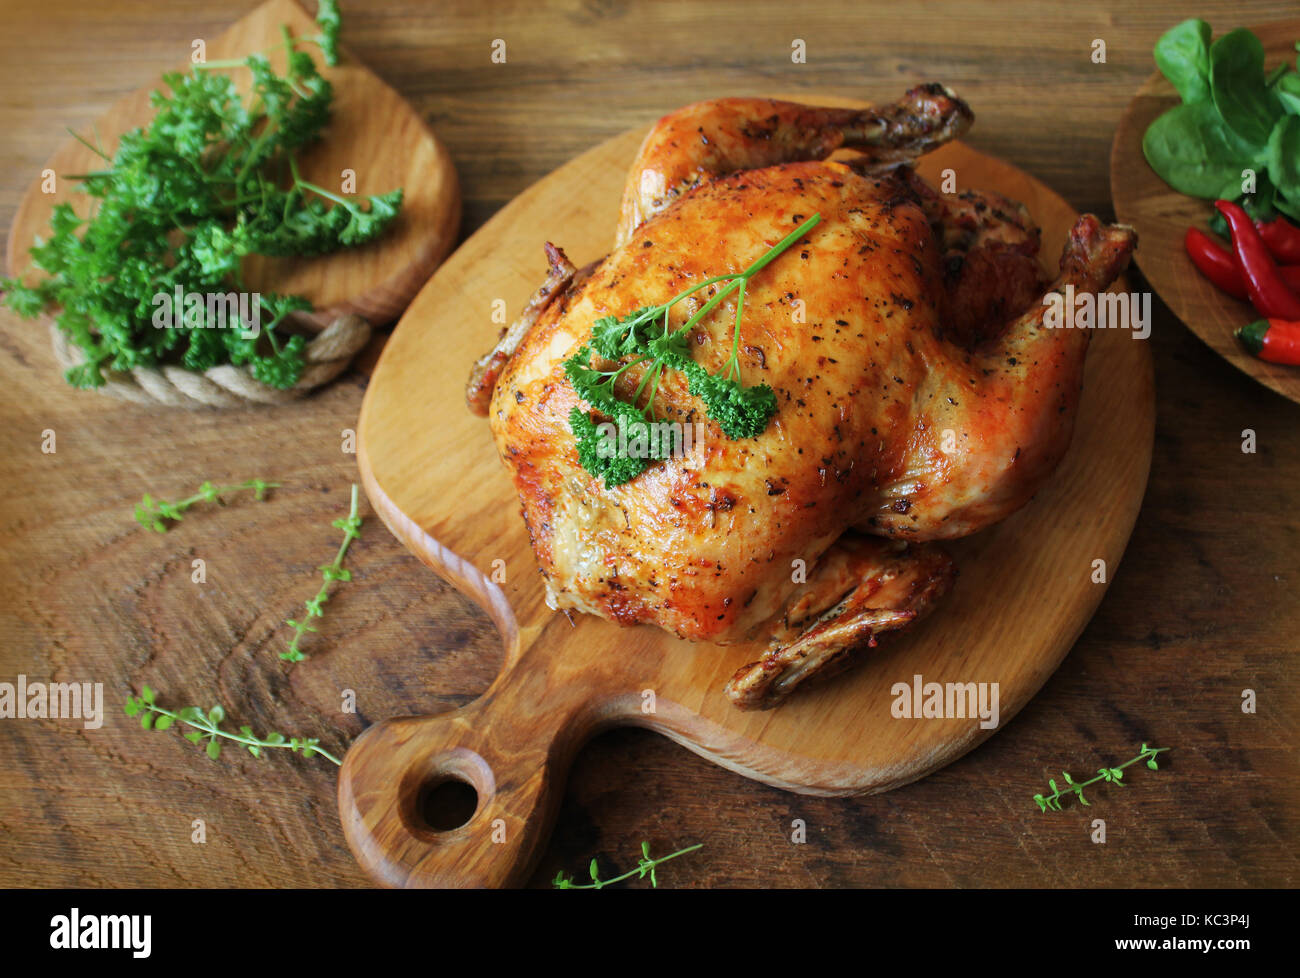 Whole roasted chicken on cutting board Stock Photo - Alamy